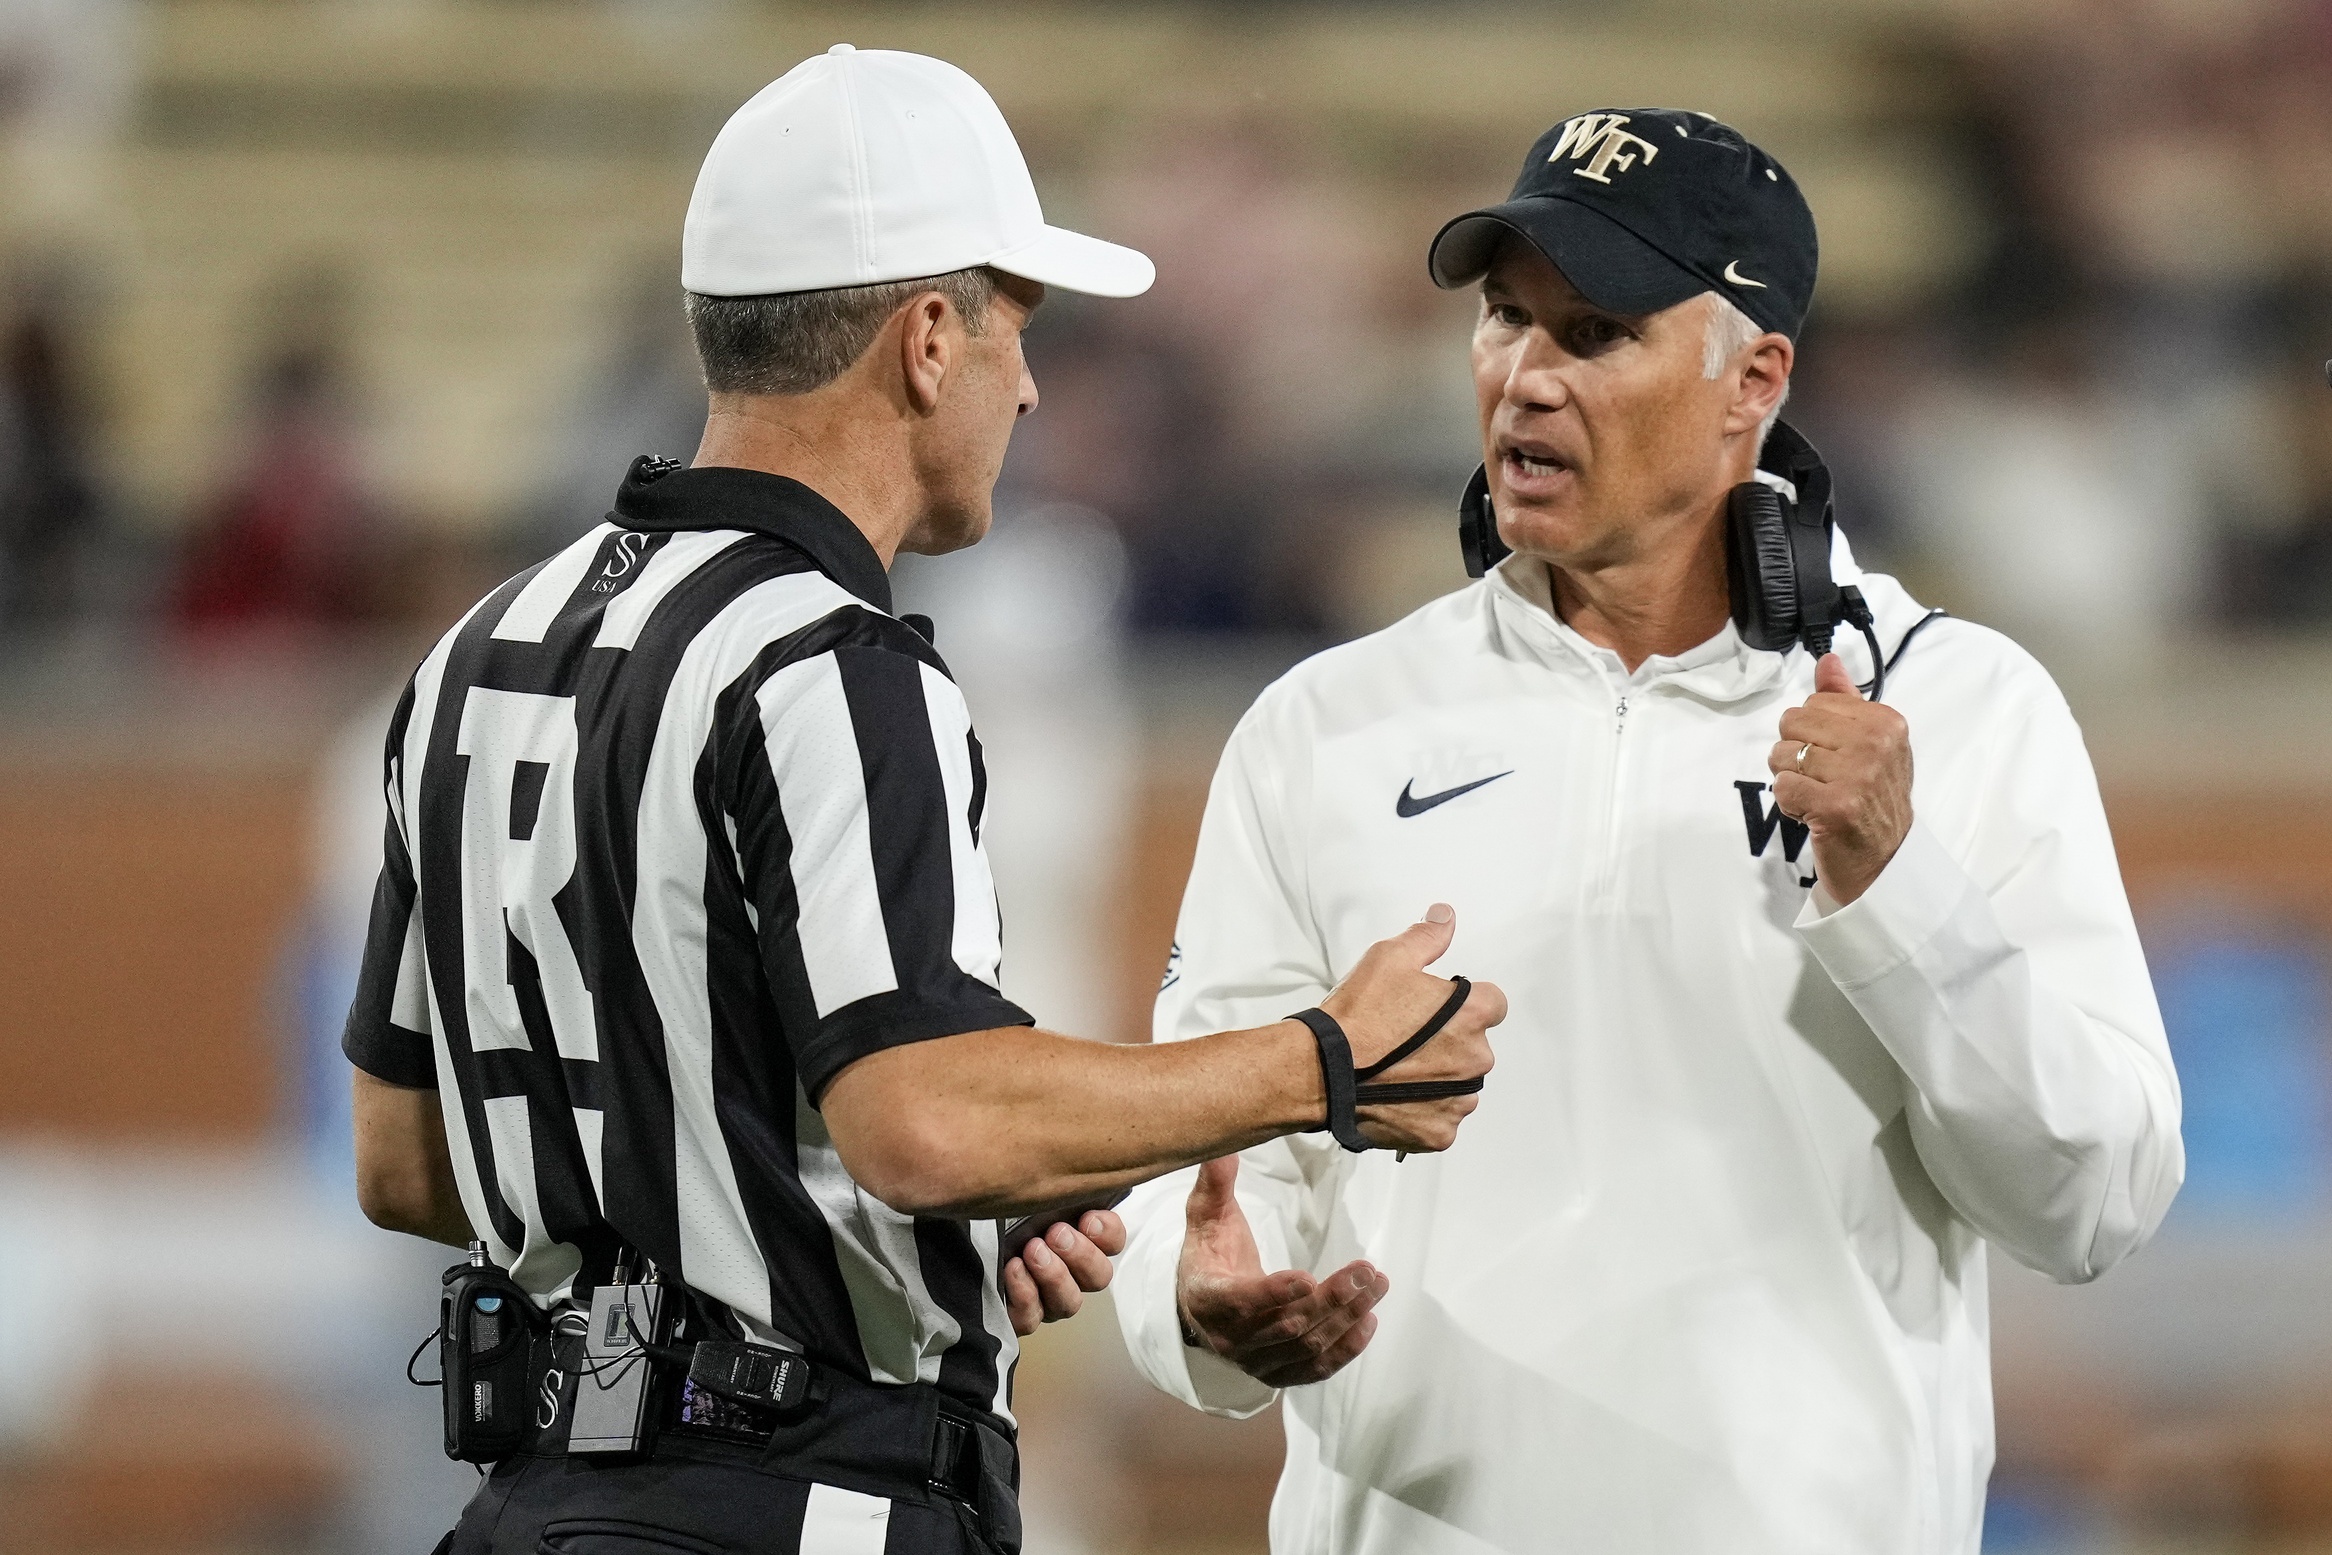 Wake Forest has a daunting task ahead